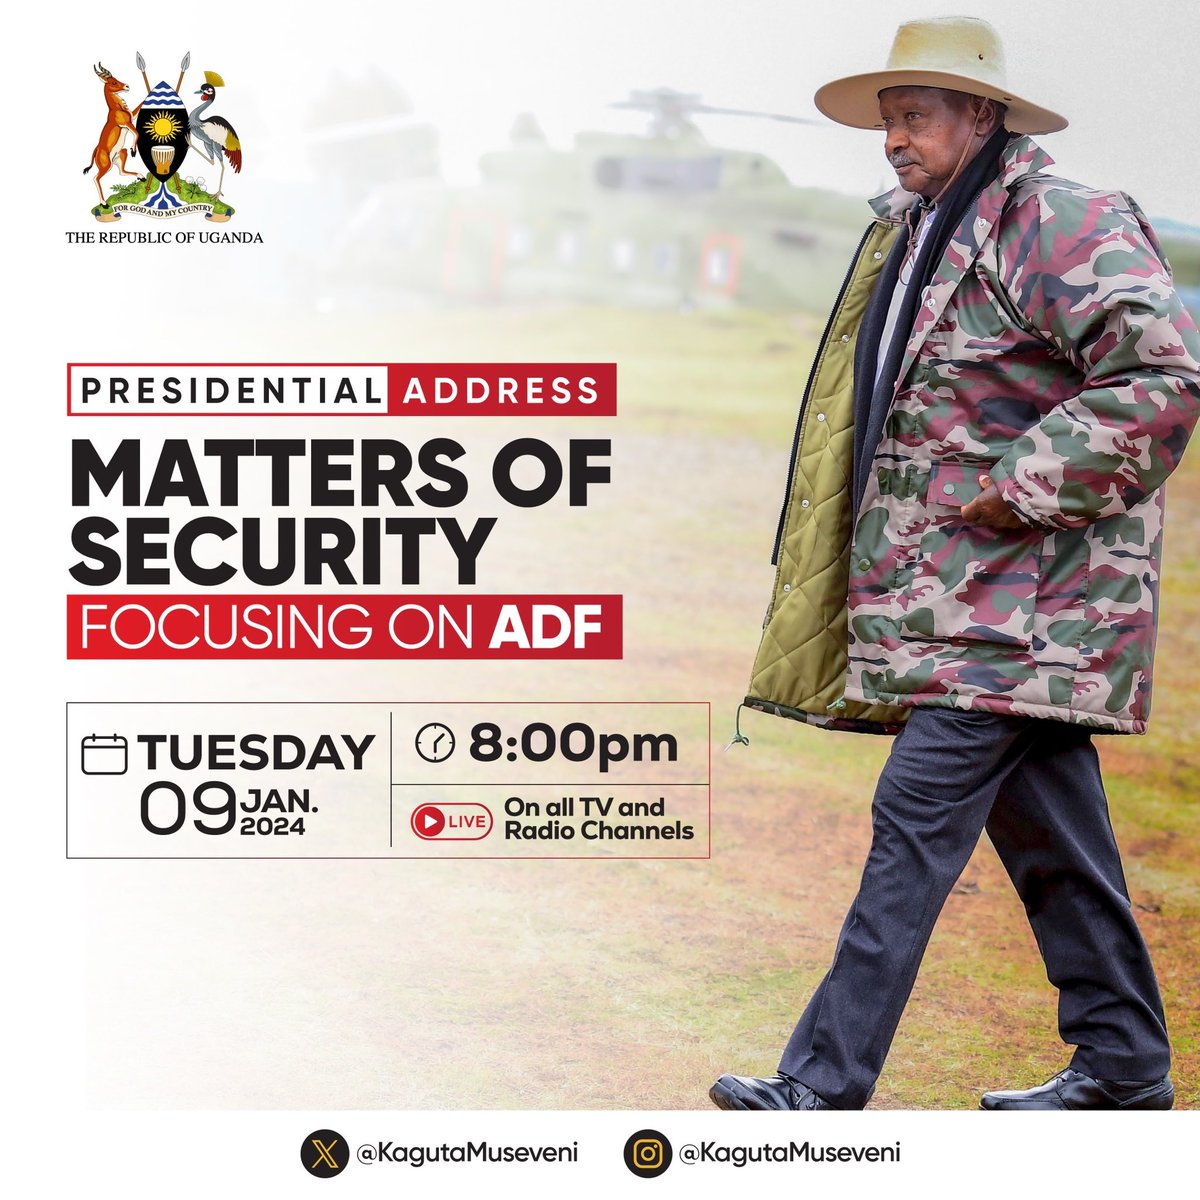 H.E @KagutaMuseveni will address the nation today the 9th of January 2024 at 8pm on matters of Security- focusing on ADF. The address will be on all televisions and radio stations. #M7Address